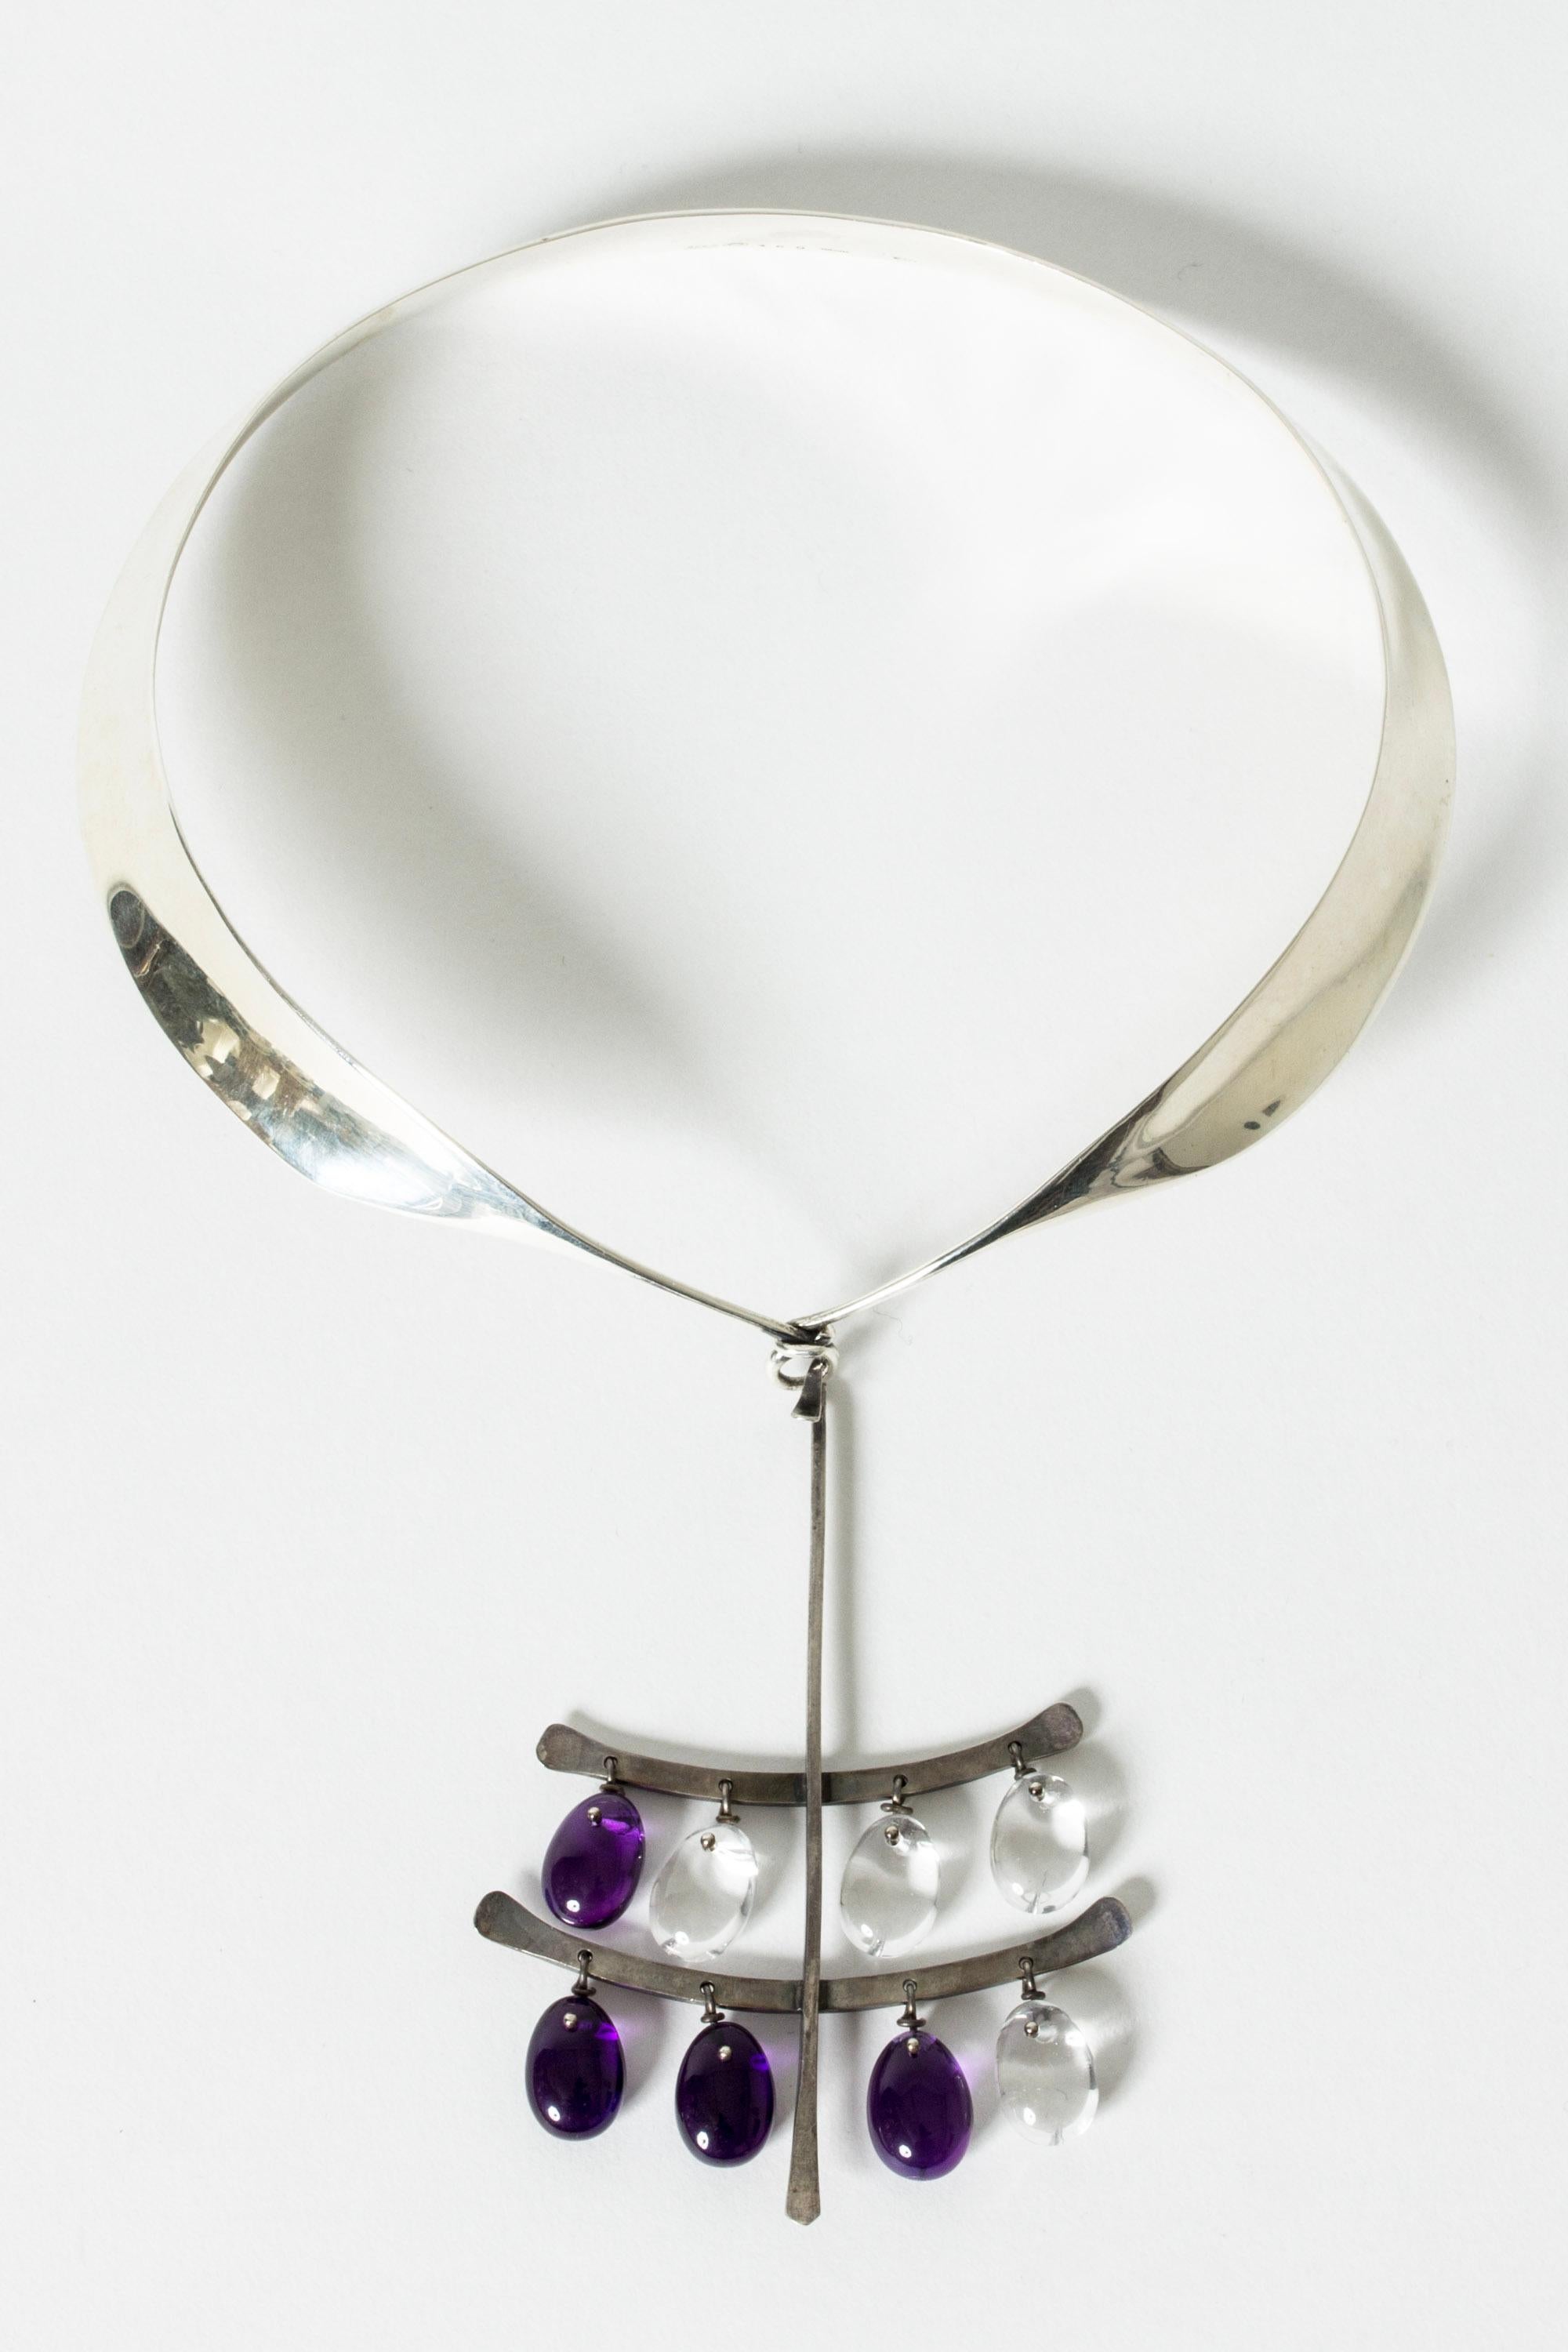 Silver neckring by Torun Bülow-Hübe with Torun’s signature “shawl” design. Stunning, large pendant with amethyst and rock crystal drops suspended on silver hooks. An exquisite collector’s piece.